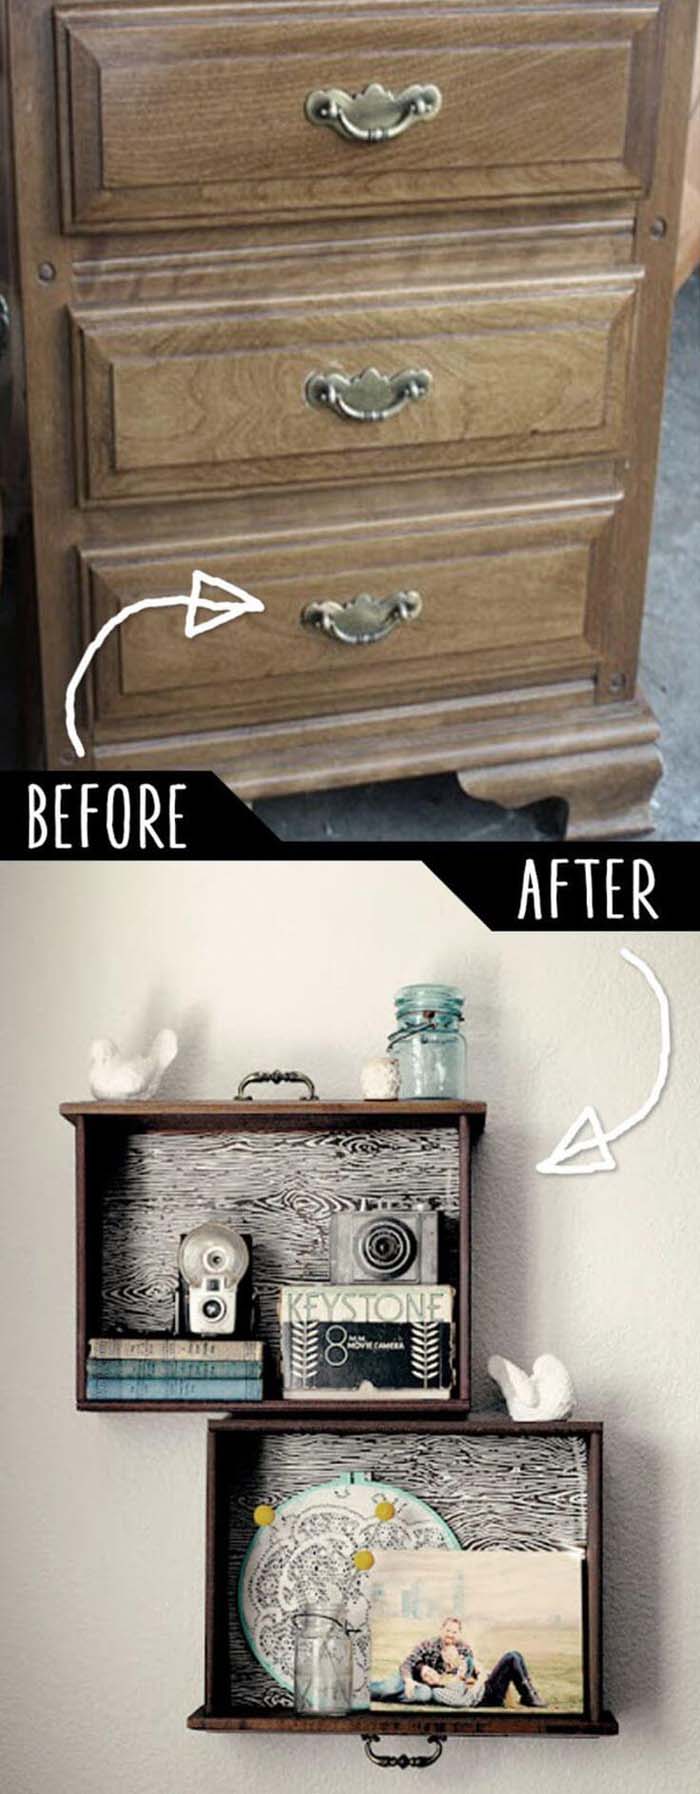 Matching Shelves With Many Uses #recycle #olddrawer #decorhomeideas